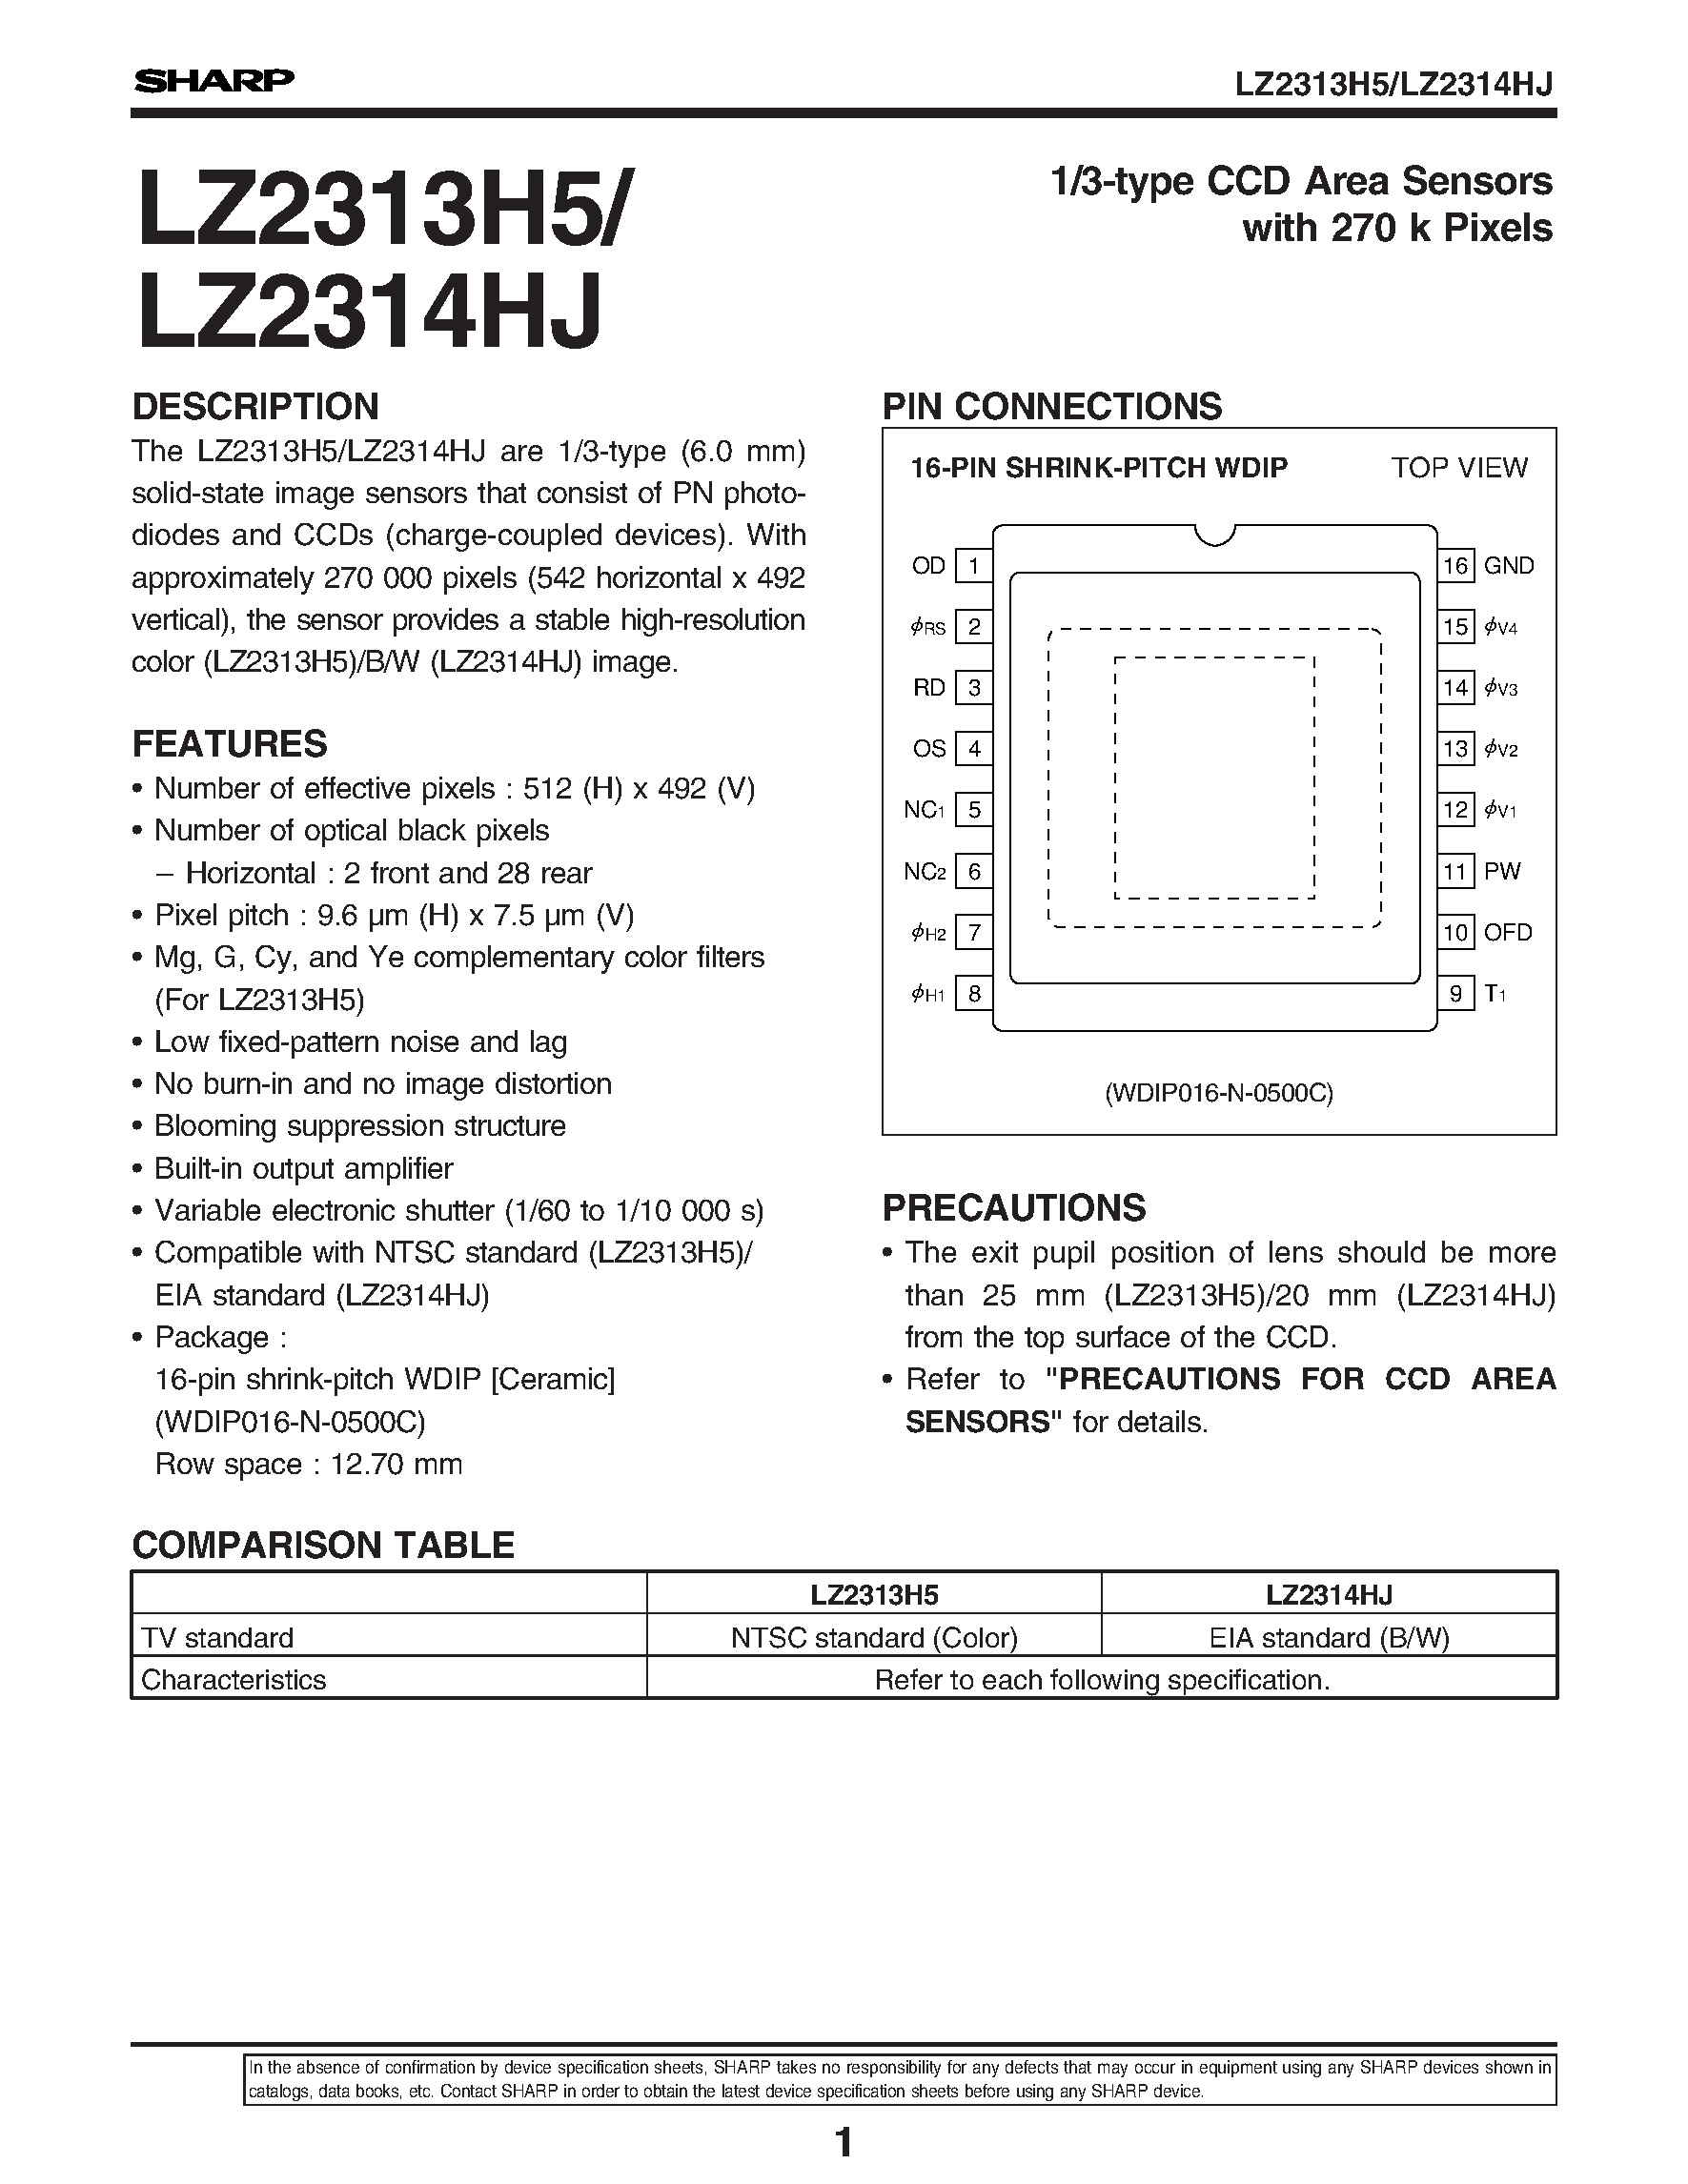 Datasheet LZ2314HJ - 1/3-type CCD Area Sensors with 270 k Pixels page 1